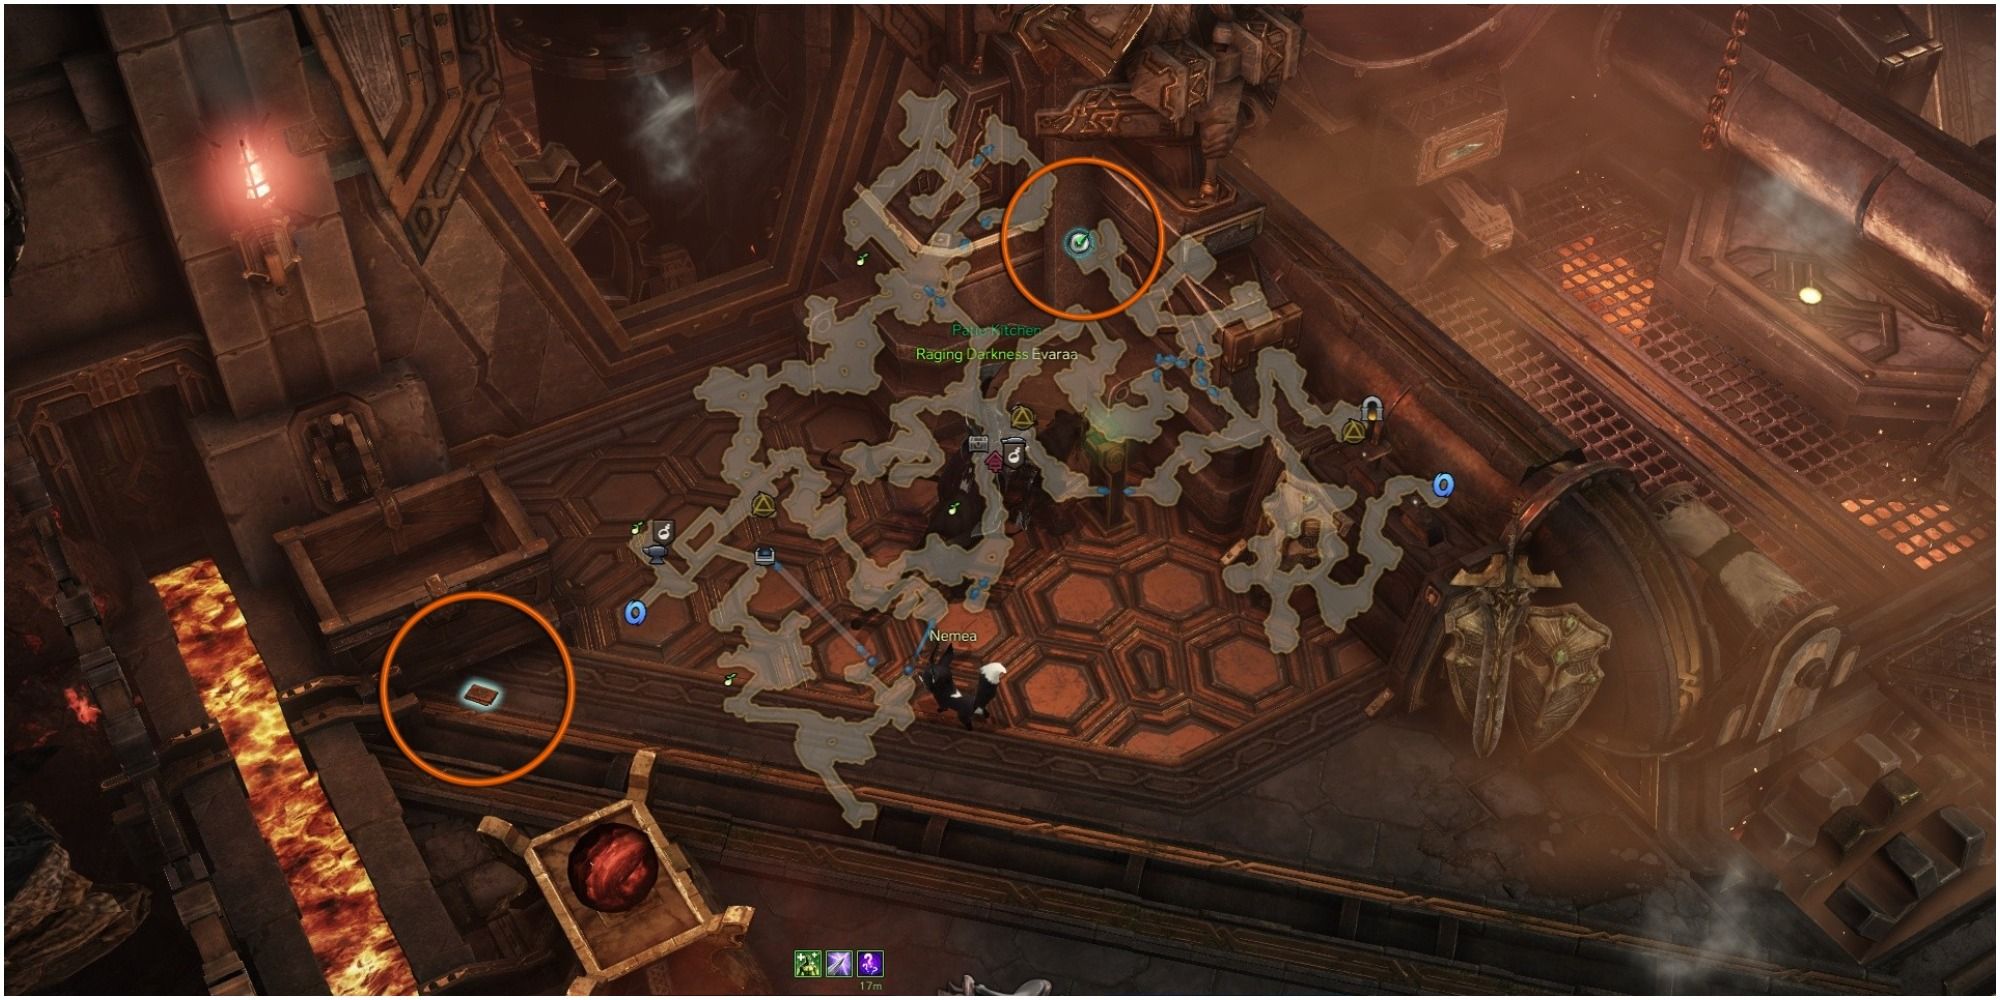 Lost Ark Yorn's Hidden Story 7-3 location with mini-map open, orange circle around object and player icon